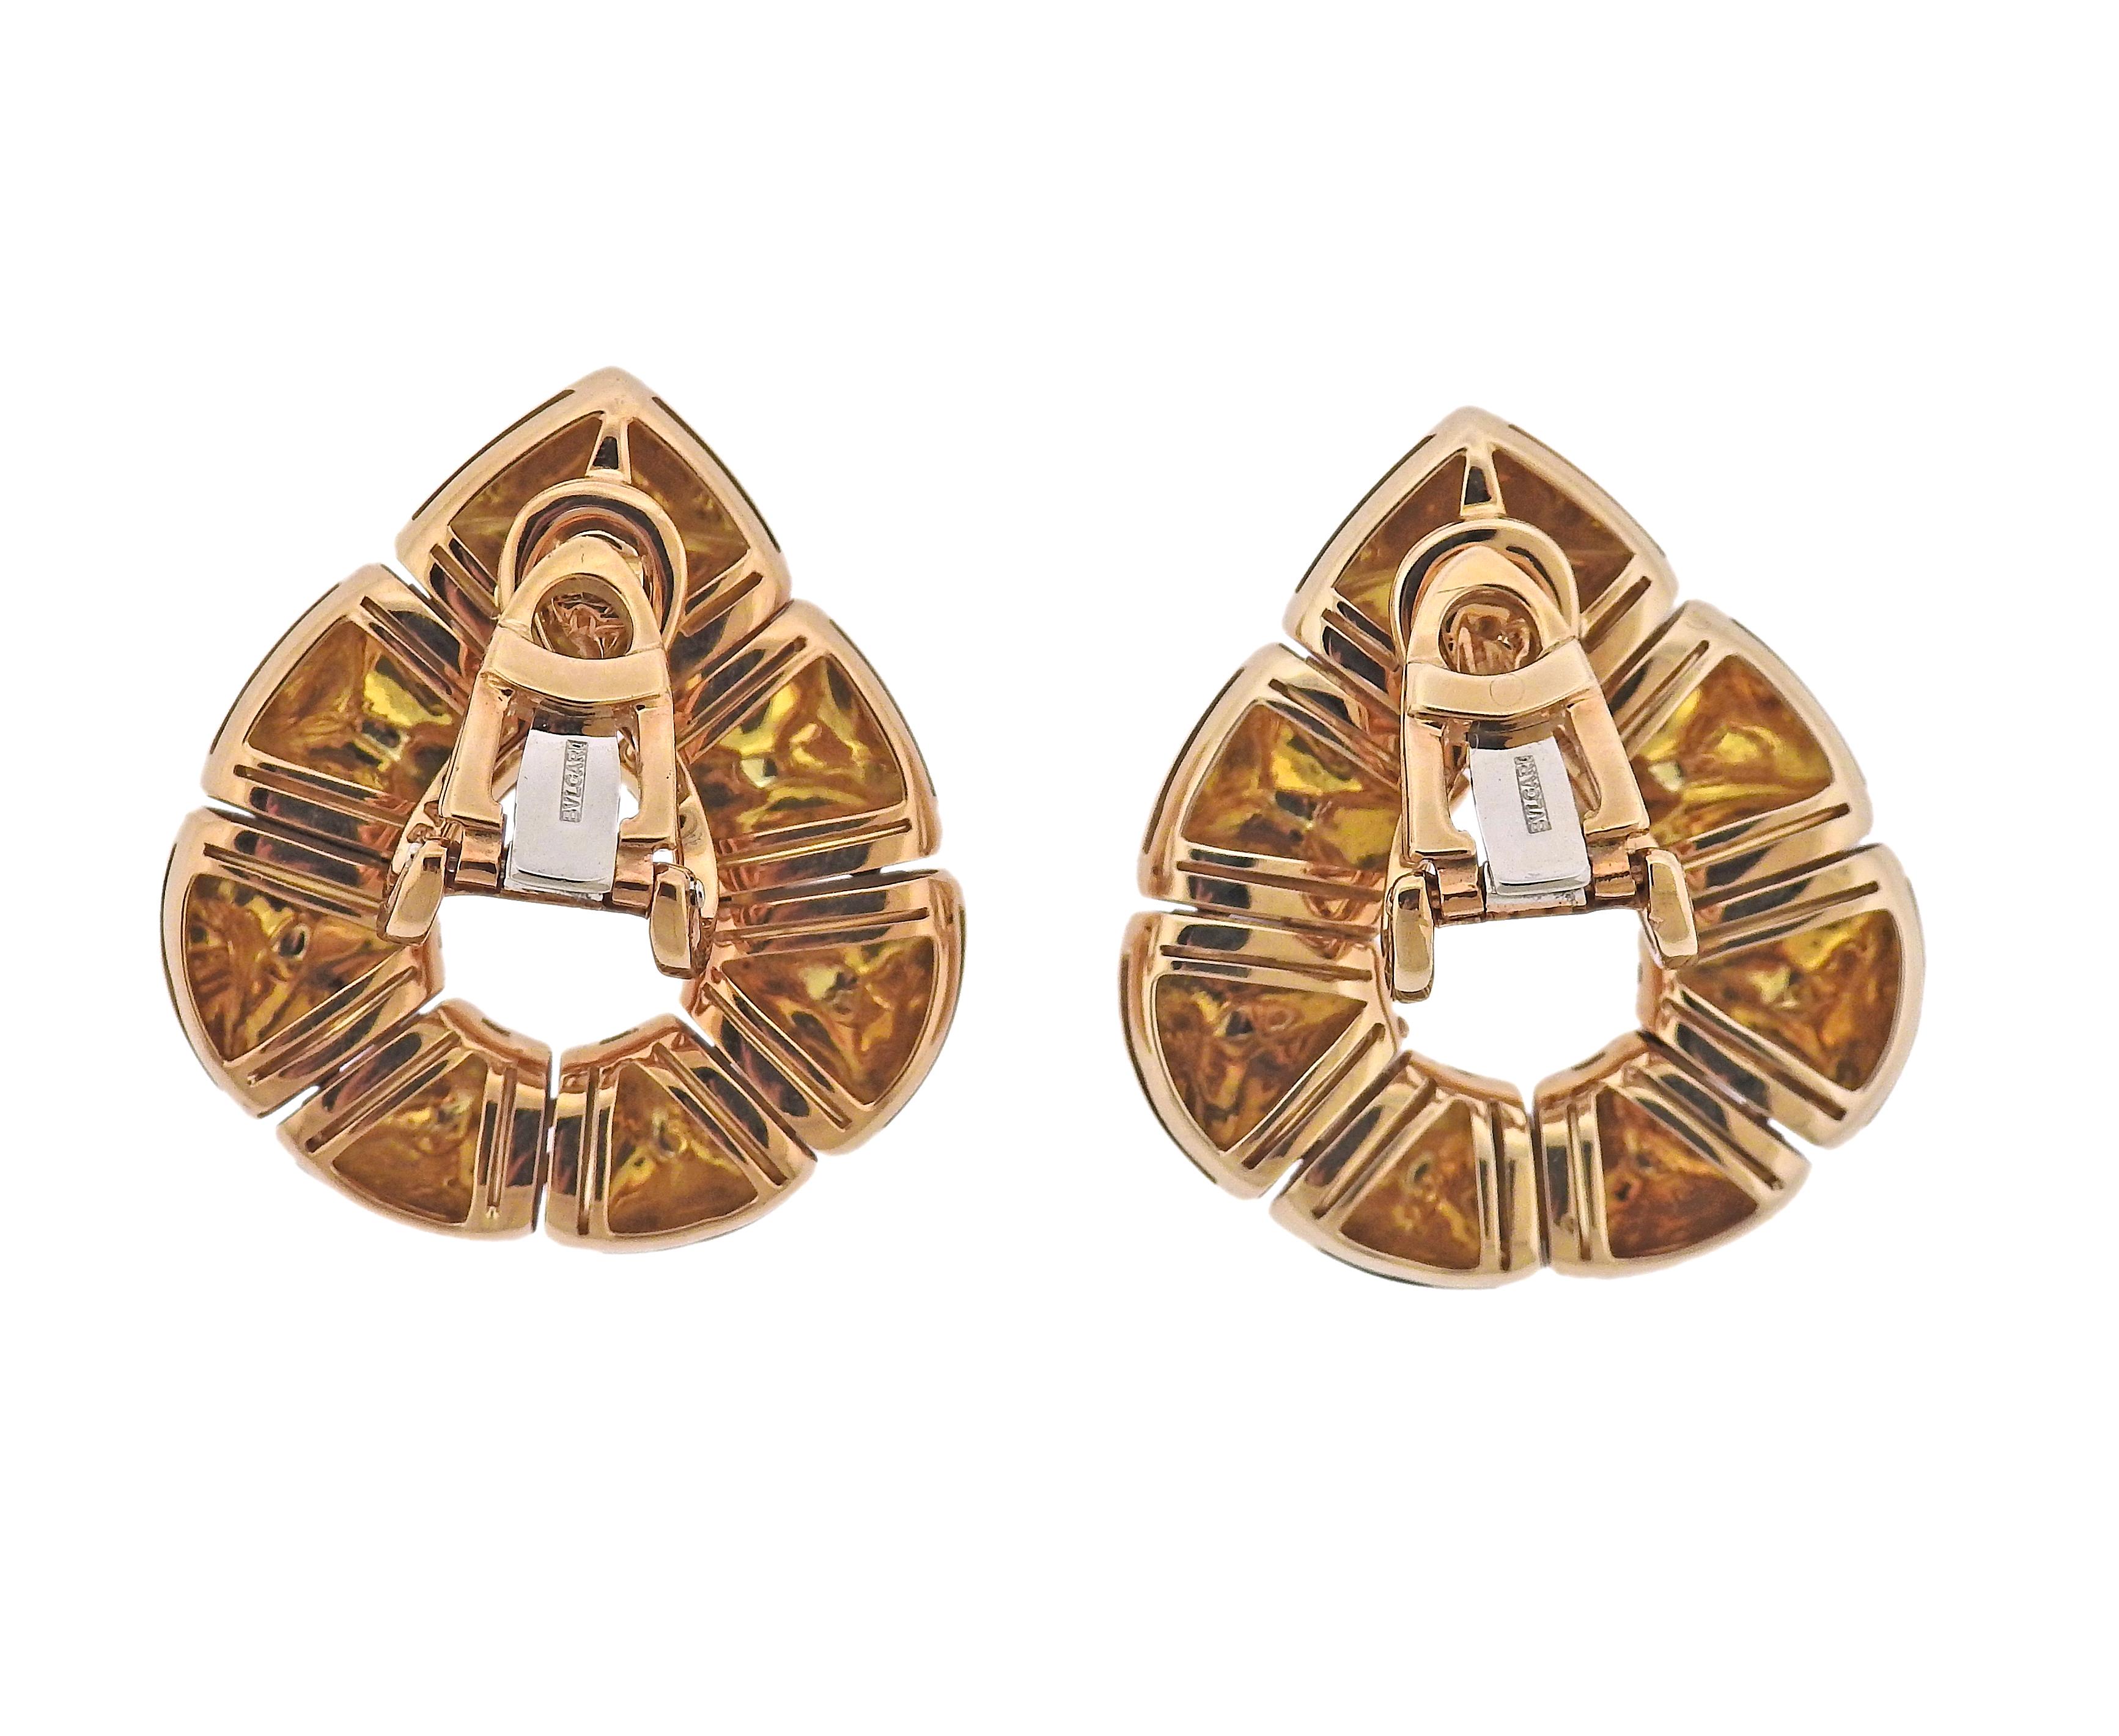 Bvlgari 18k yellow gold earrings. Come with Bvlgari box and a copy of Insurance Appraisal report from 1992. Earrings are 33mm x 30mm. Weight - 50.6 grams. Marked: BA 6418, Bvlgari, 750, 2337AL.